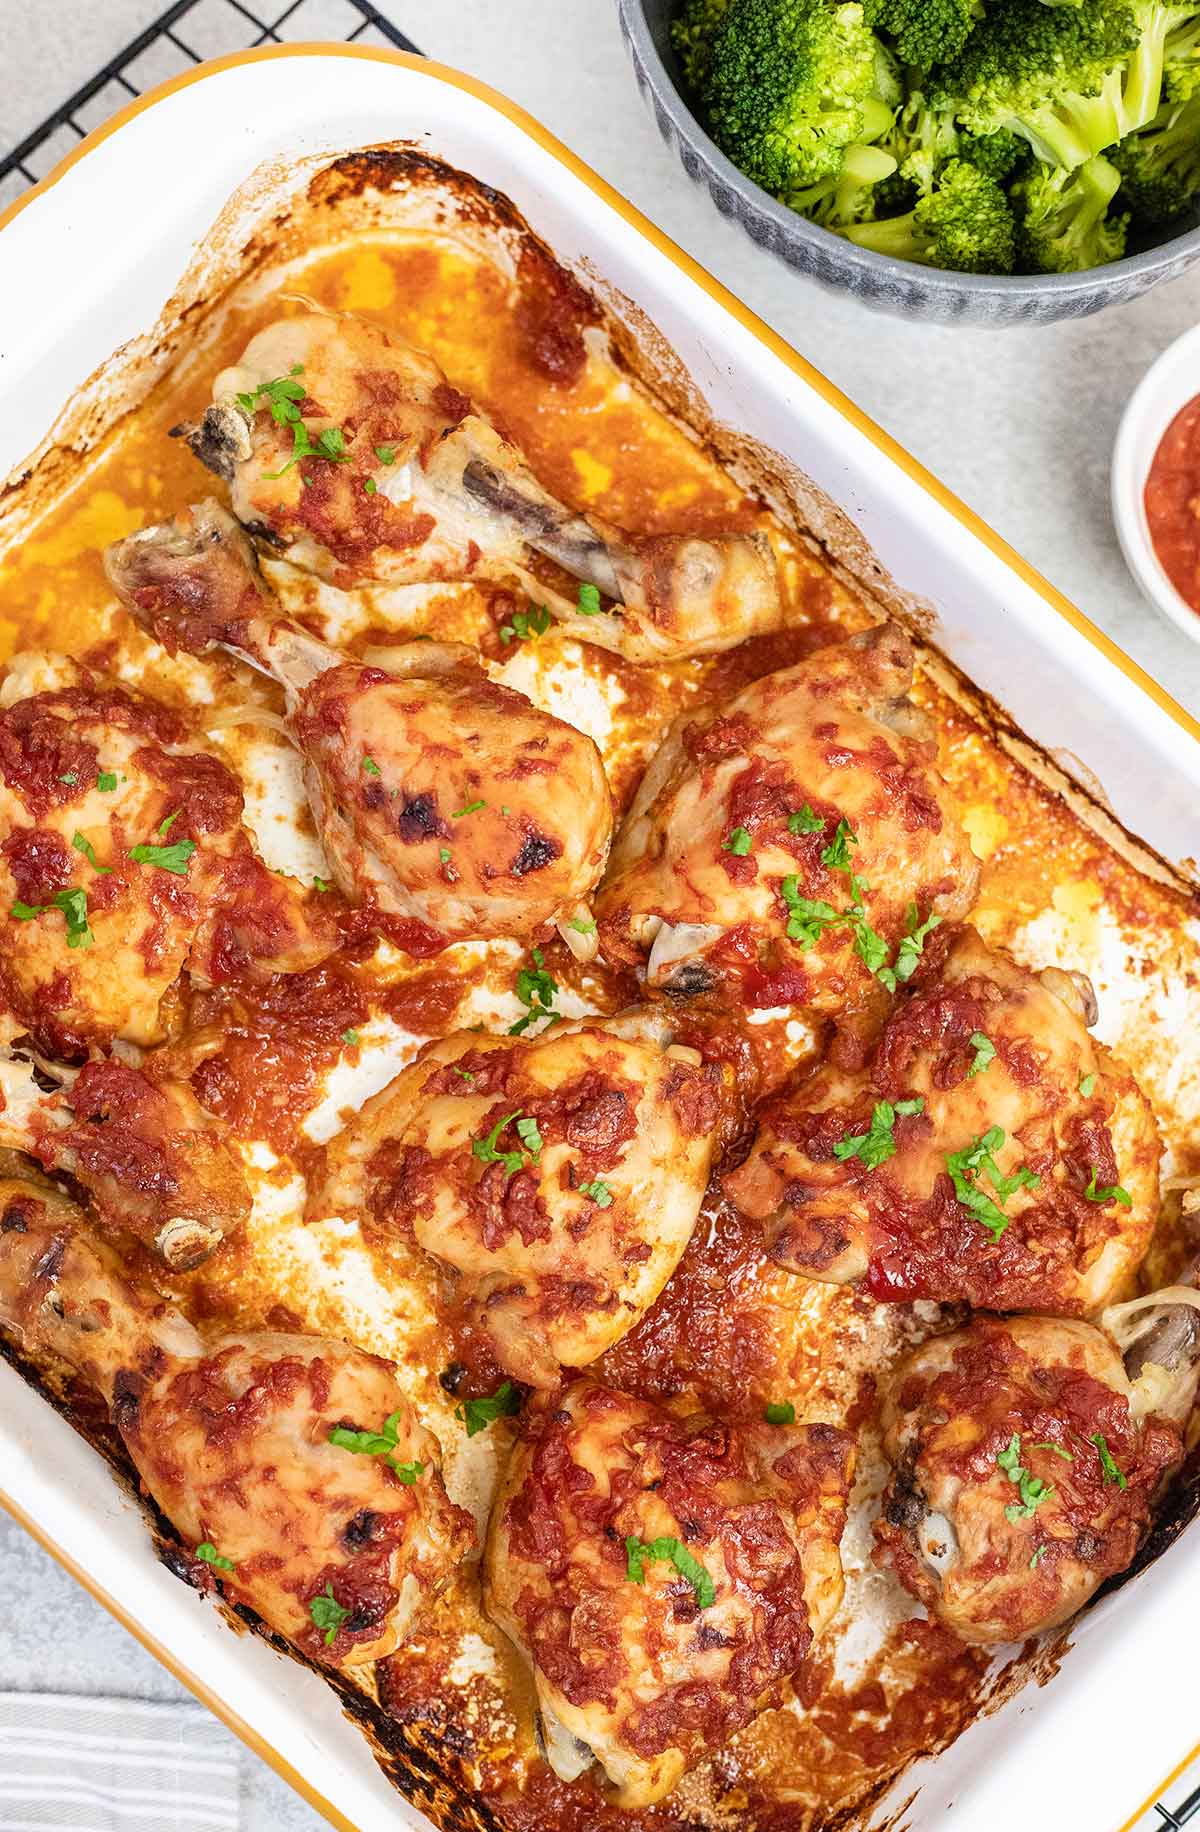 Baked BBQ chicken legs & thighs in the baking pan.